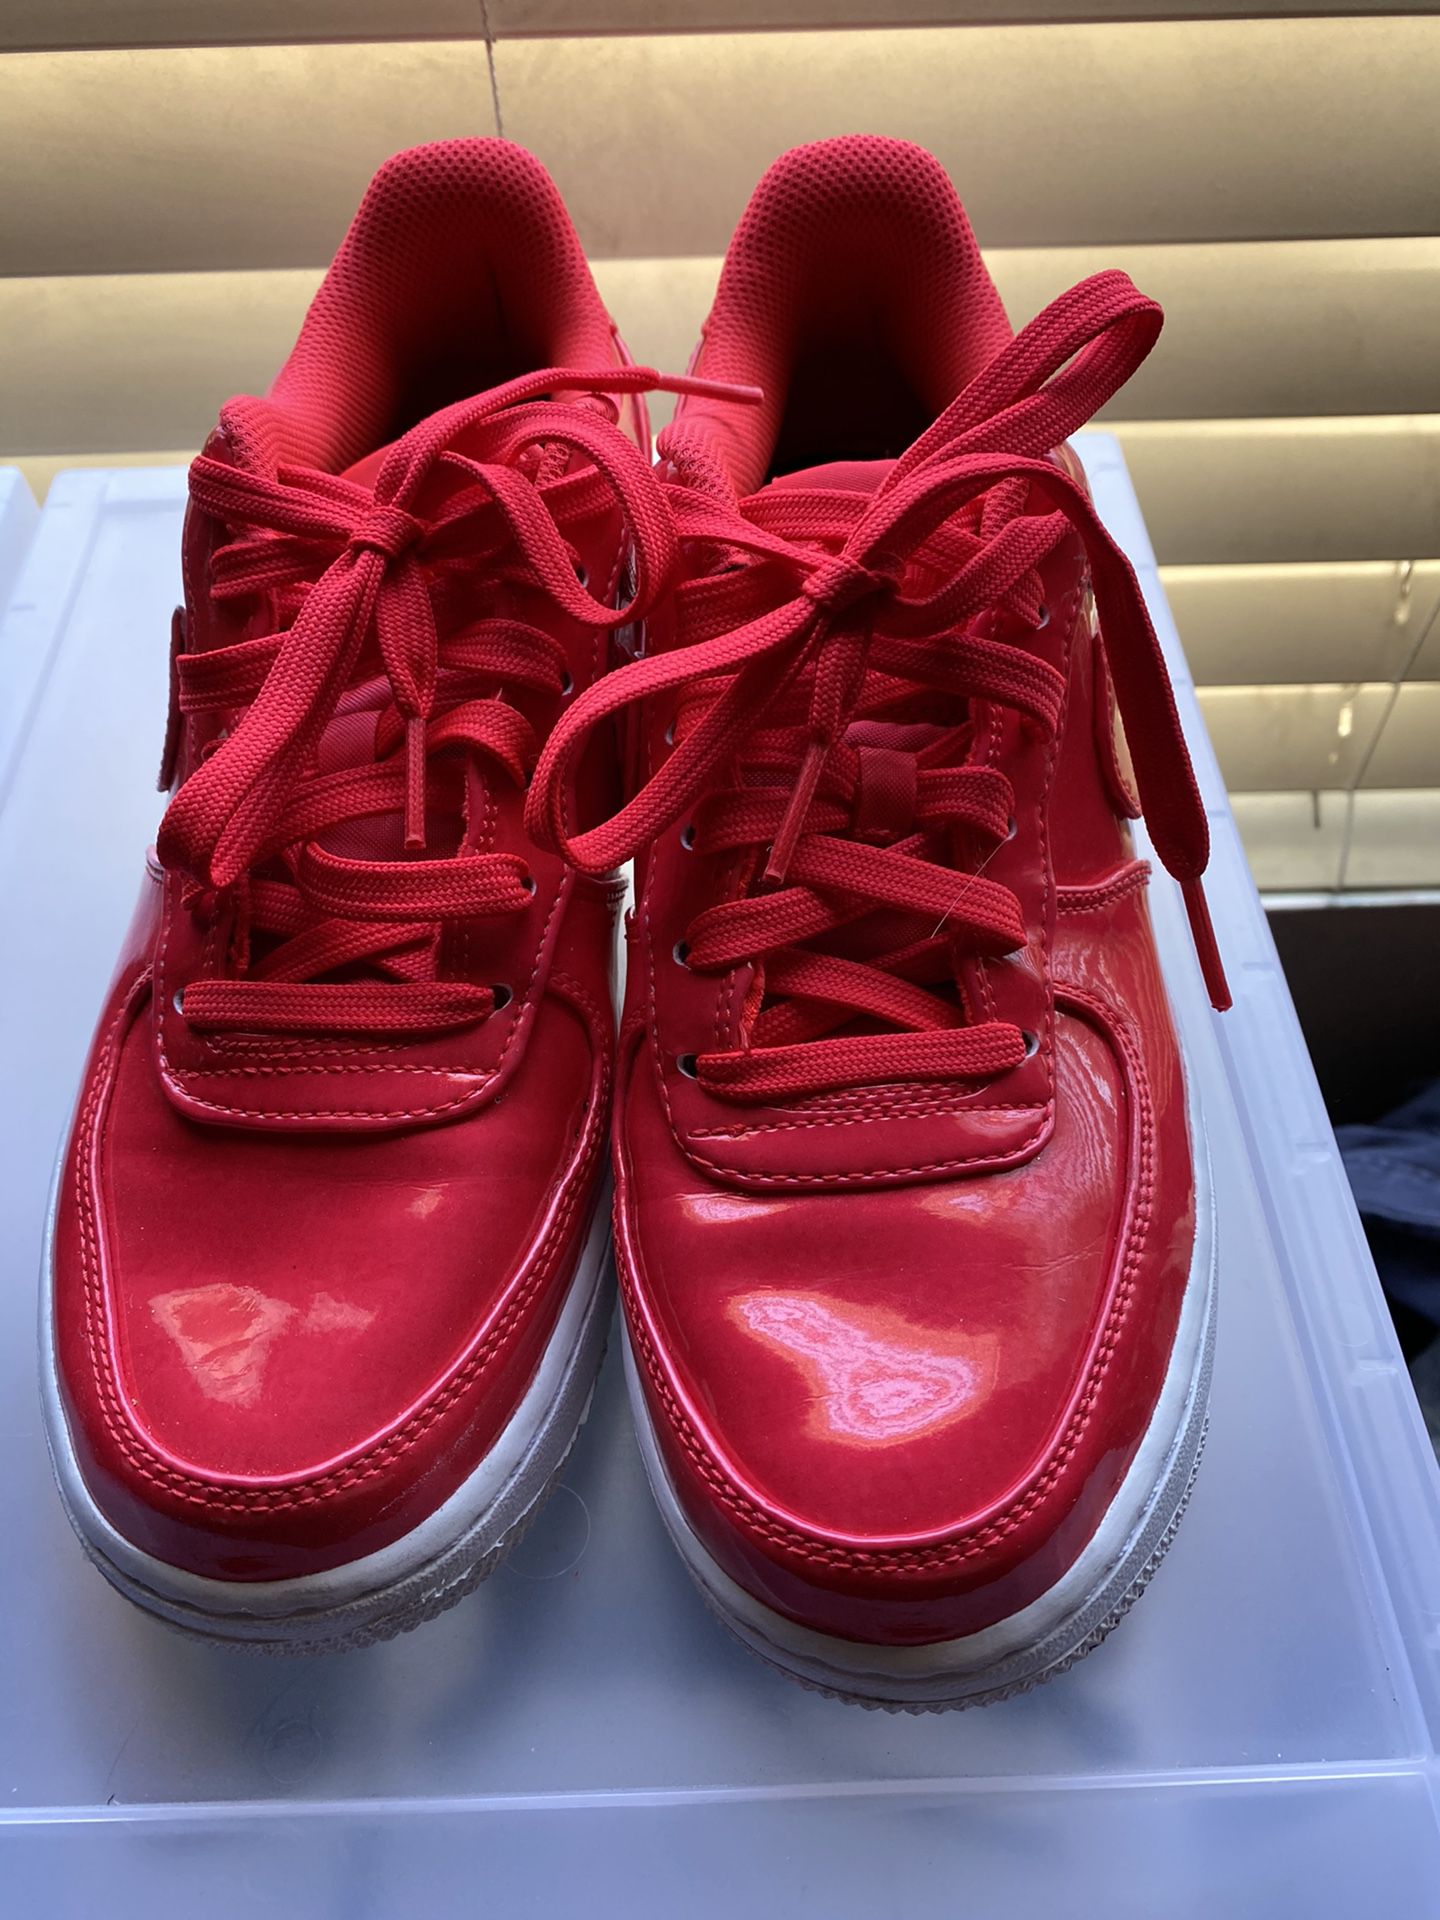 Hot pink nike Air Force 1 size 6y